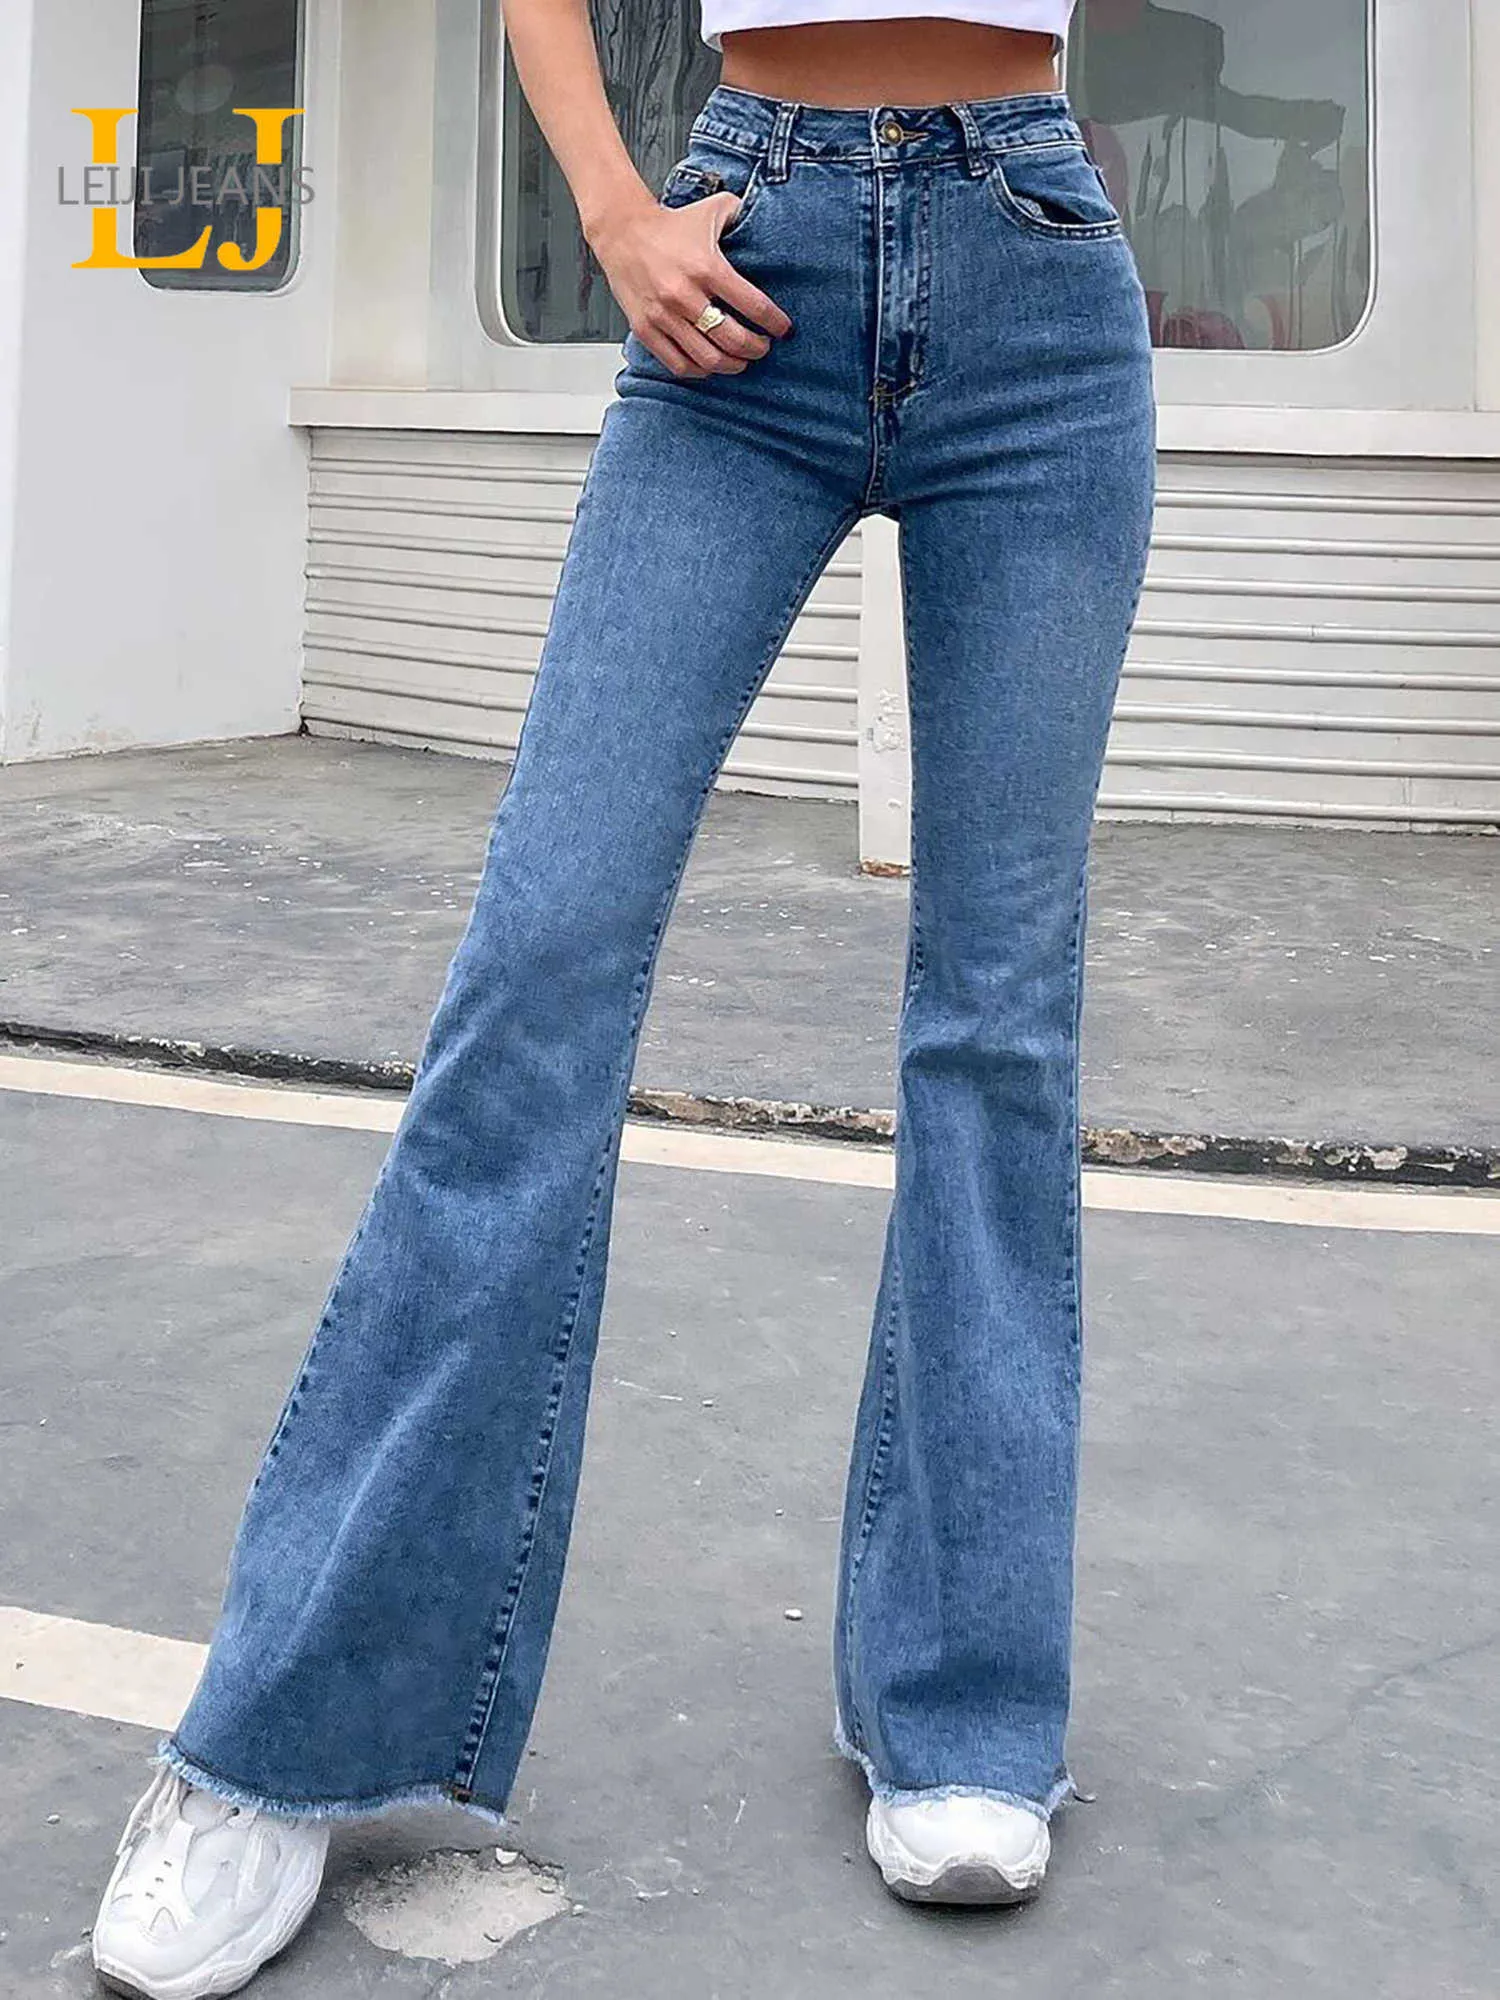 Stretchy High Waist Flared Flared Jeans For Women For Women Full